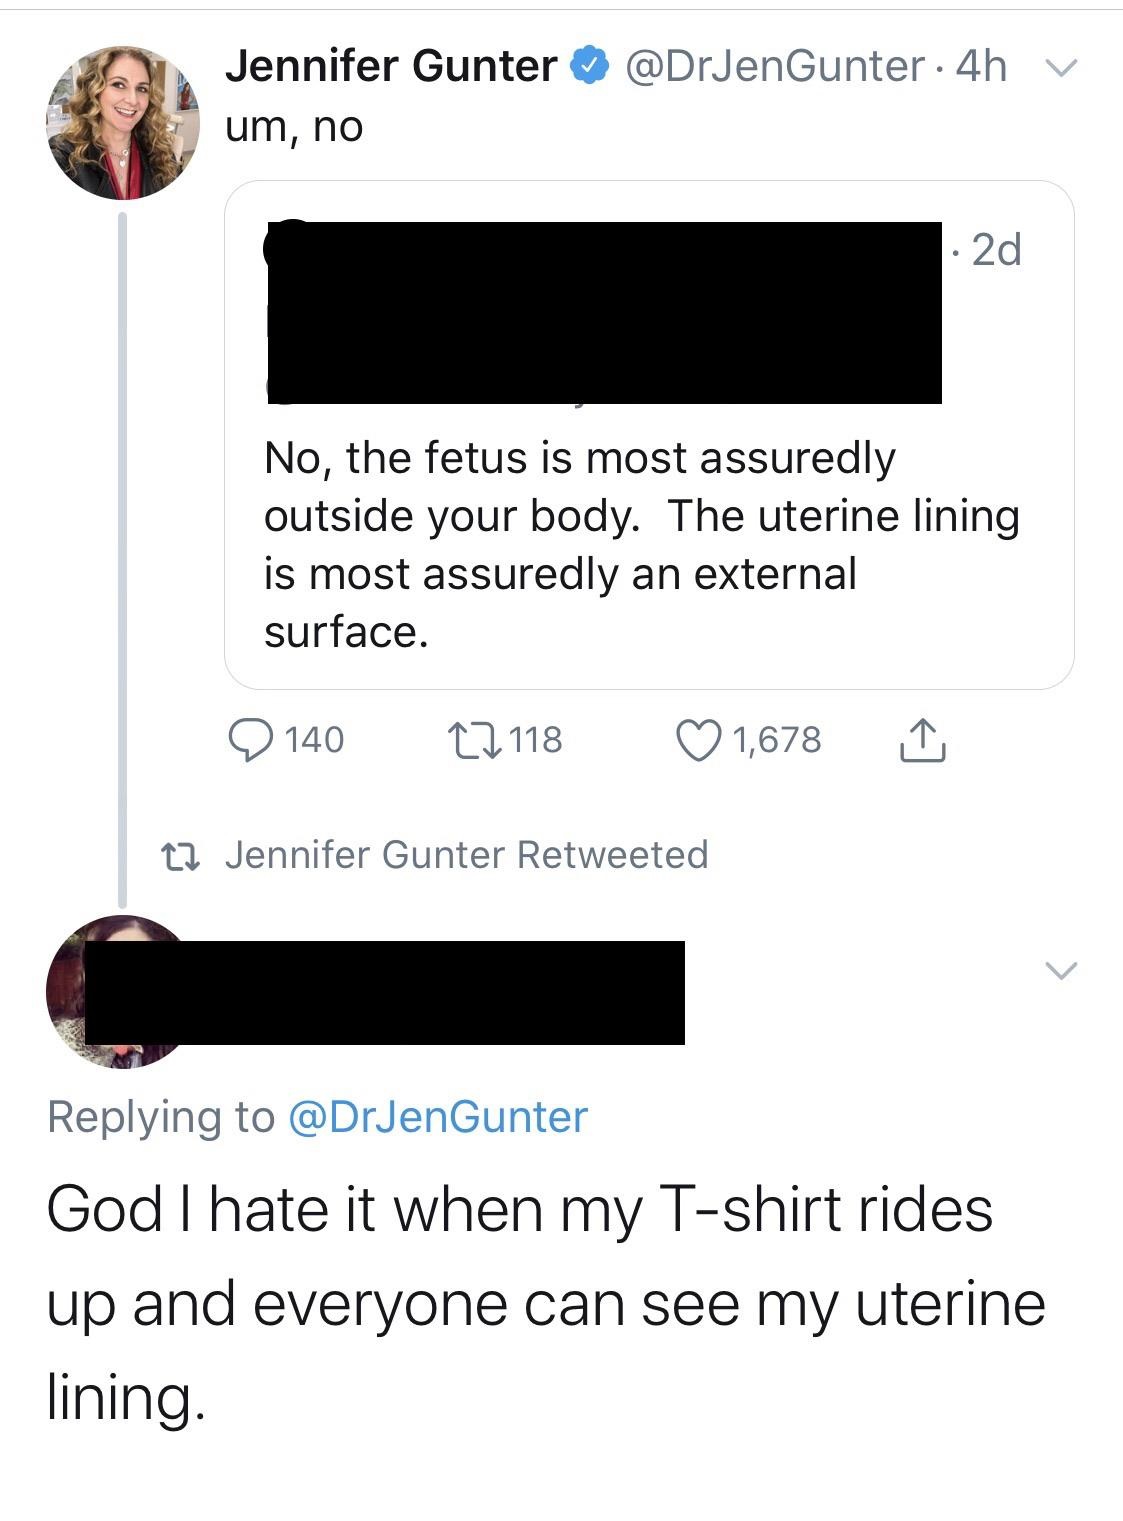 screenshot - 4h v Jennifer Gunter um, no 2d No, the fetus is most assuredly outside your body. The uterine lining is most assuredly an external surface. 9 140 27 118 1,678 22 Jennifer Gunter Retweeted God I hate it when my Tshirt rides up and everyone can